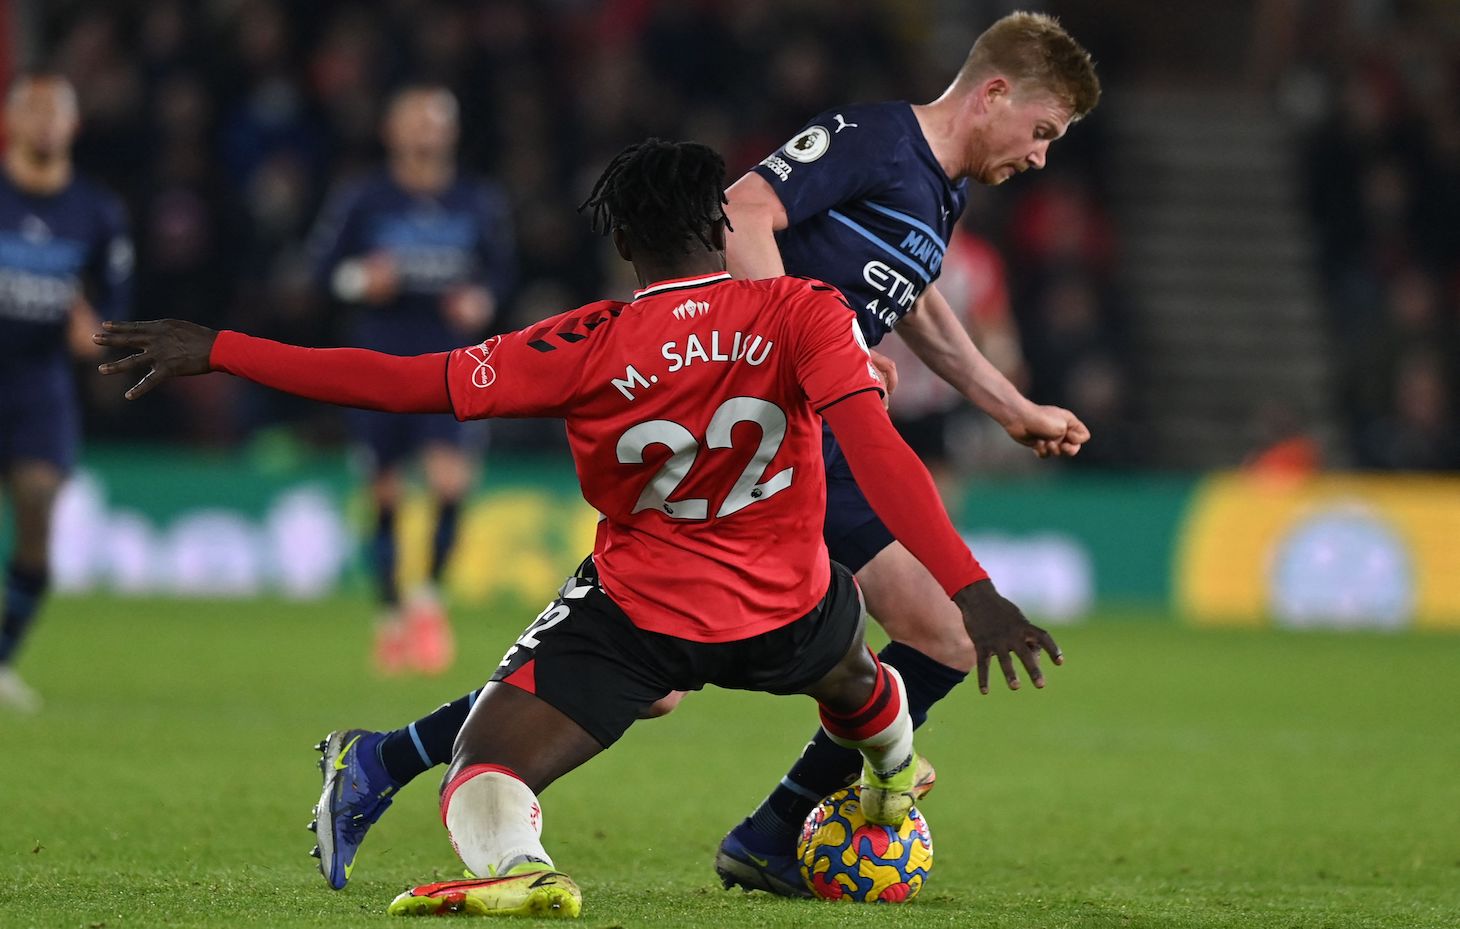 Manchester City's Belgian midfielder Kevin De Bruyne is tackled by Southampton's Ghanaian defender Mohammed Salisu during the English Premier League football match between Southampton and Manchester City at St Mary's Stadium in Southampton, southern England on January 22, 2022.